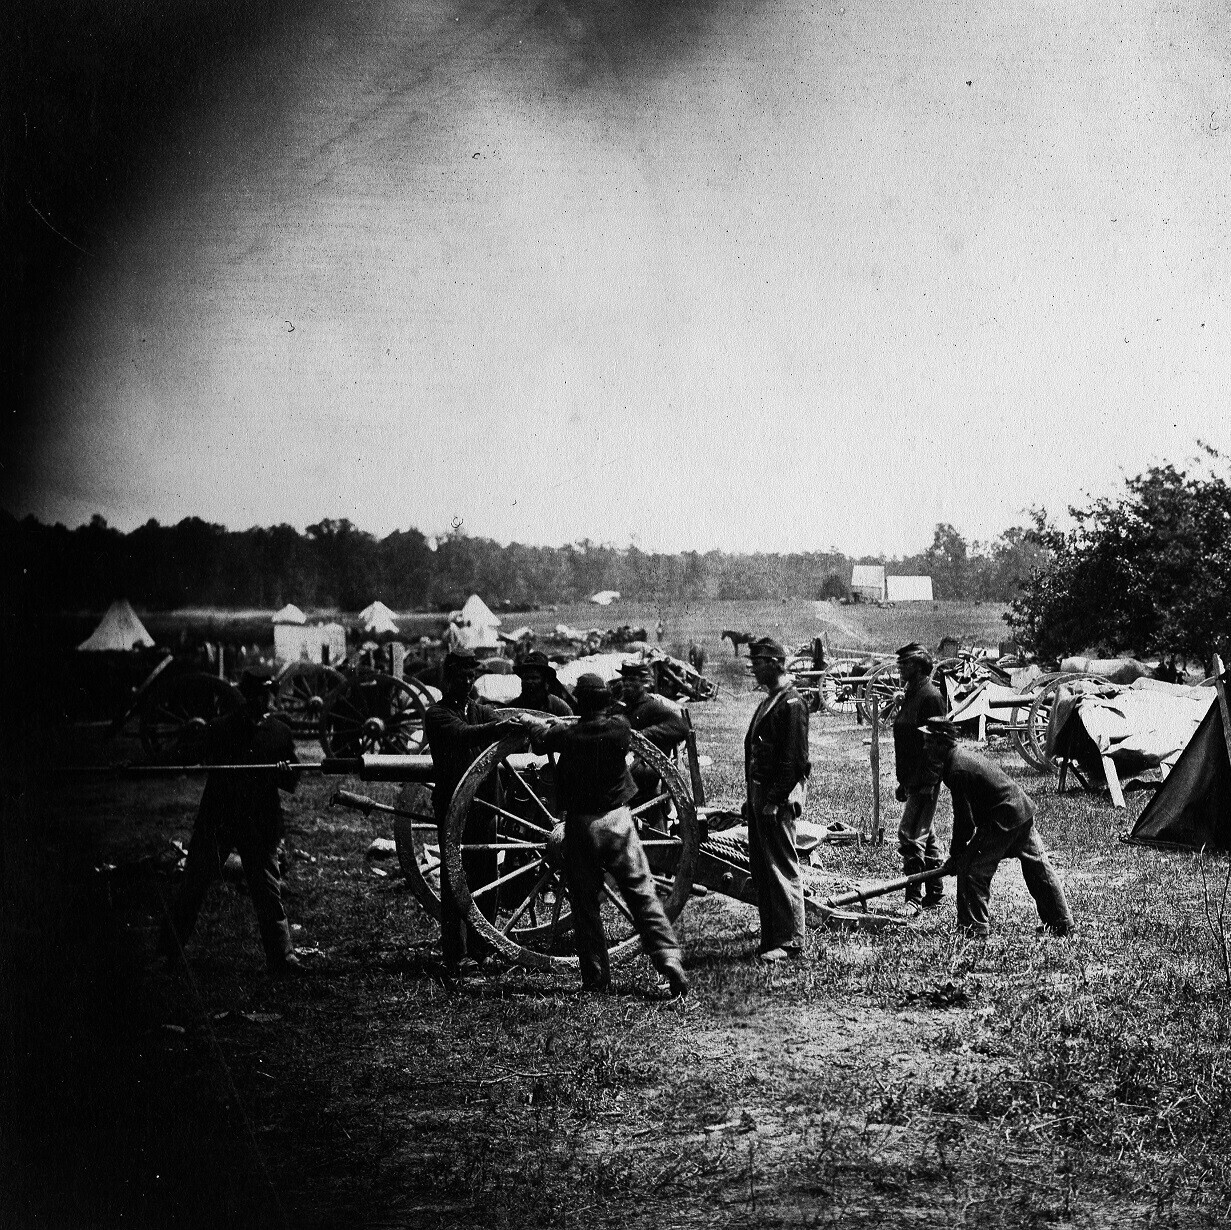 photo of Civil War soldiers using cannon